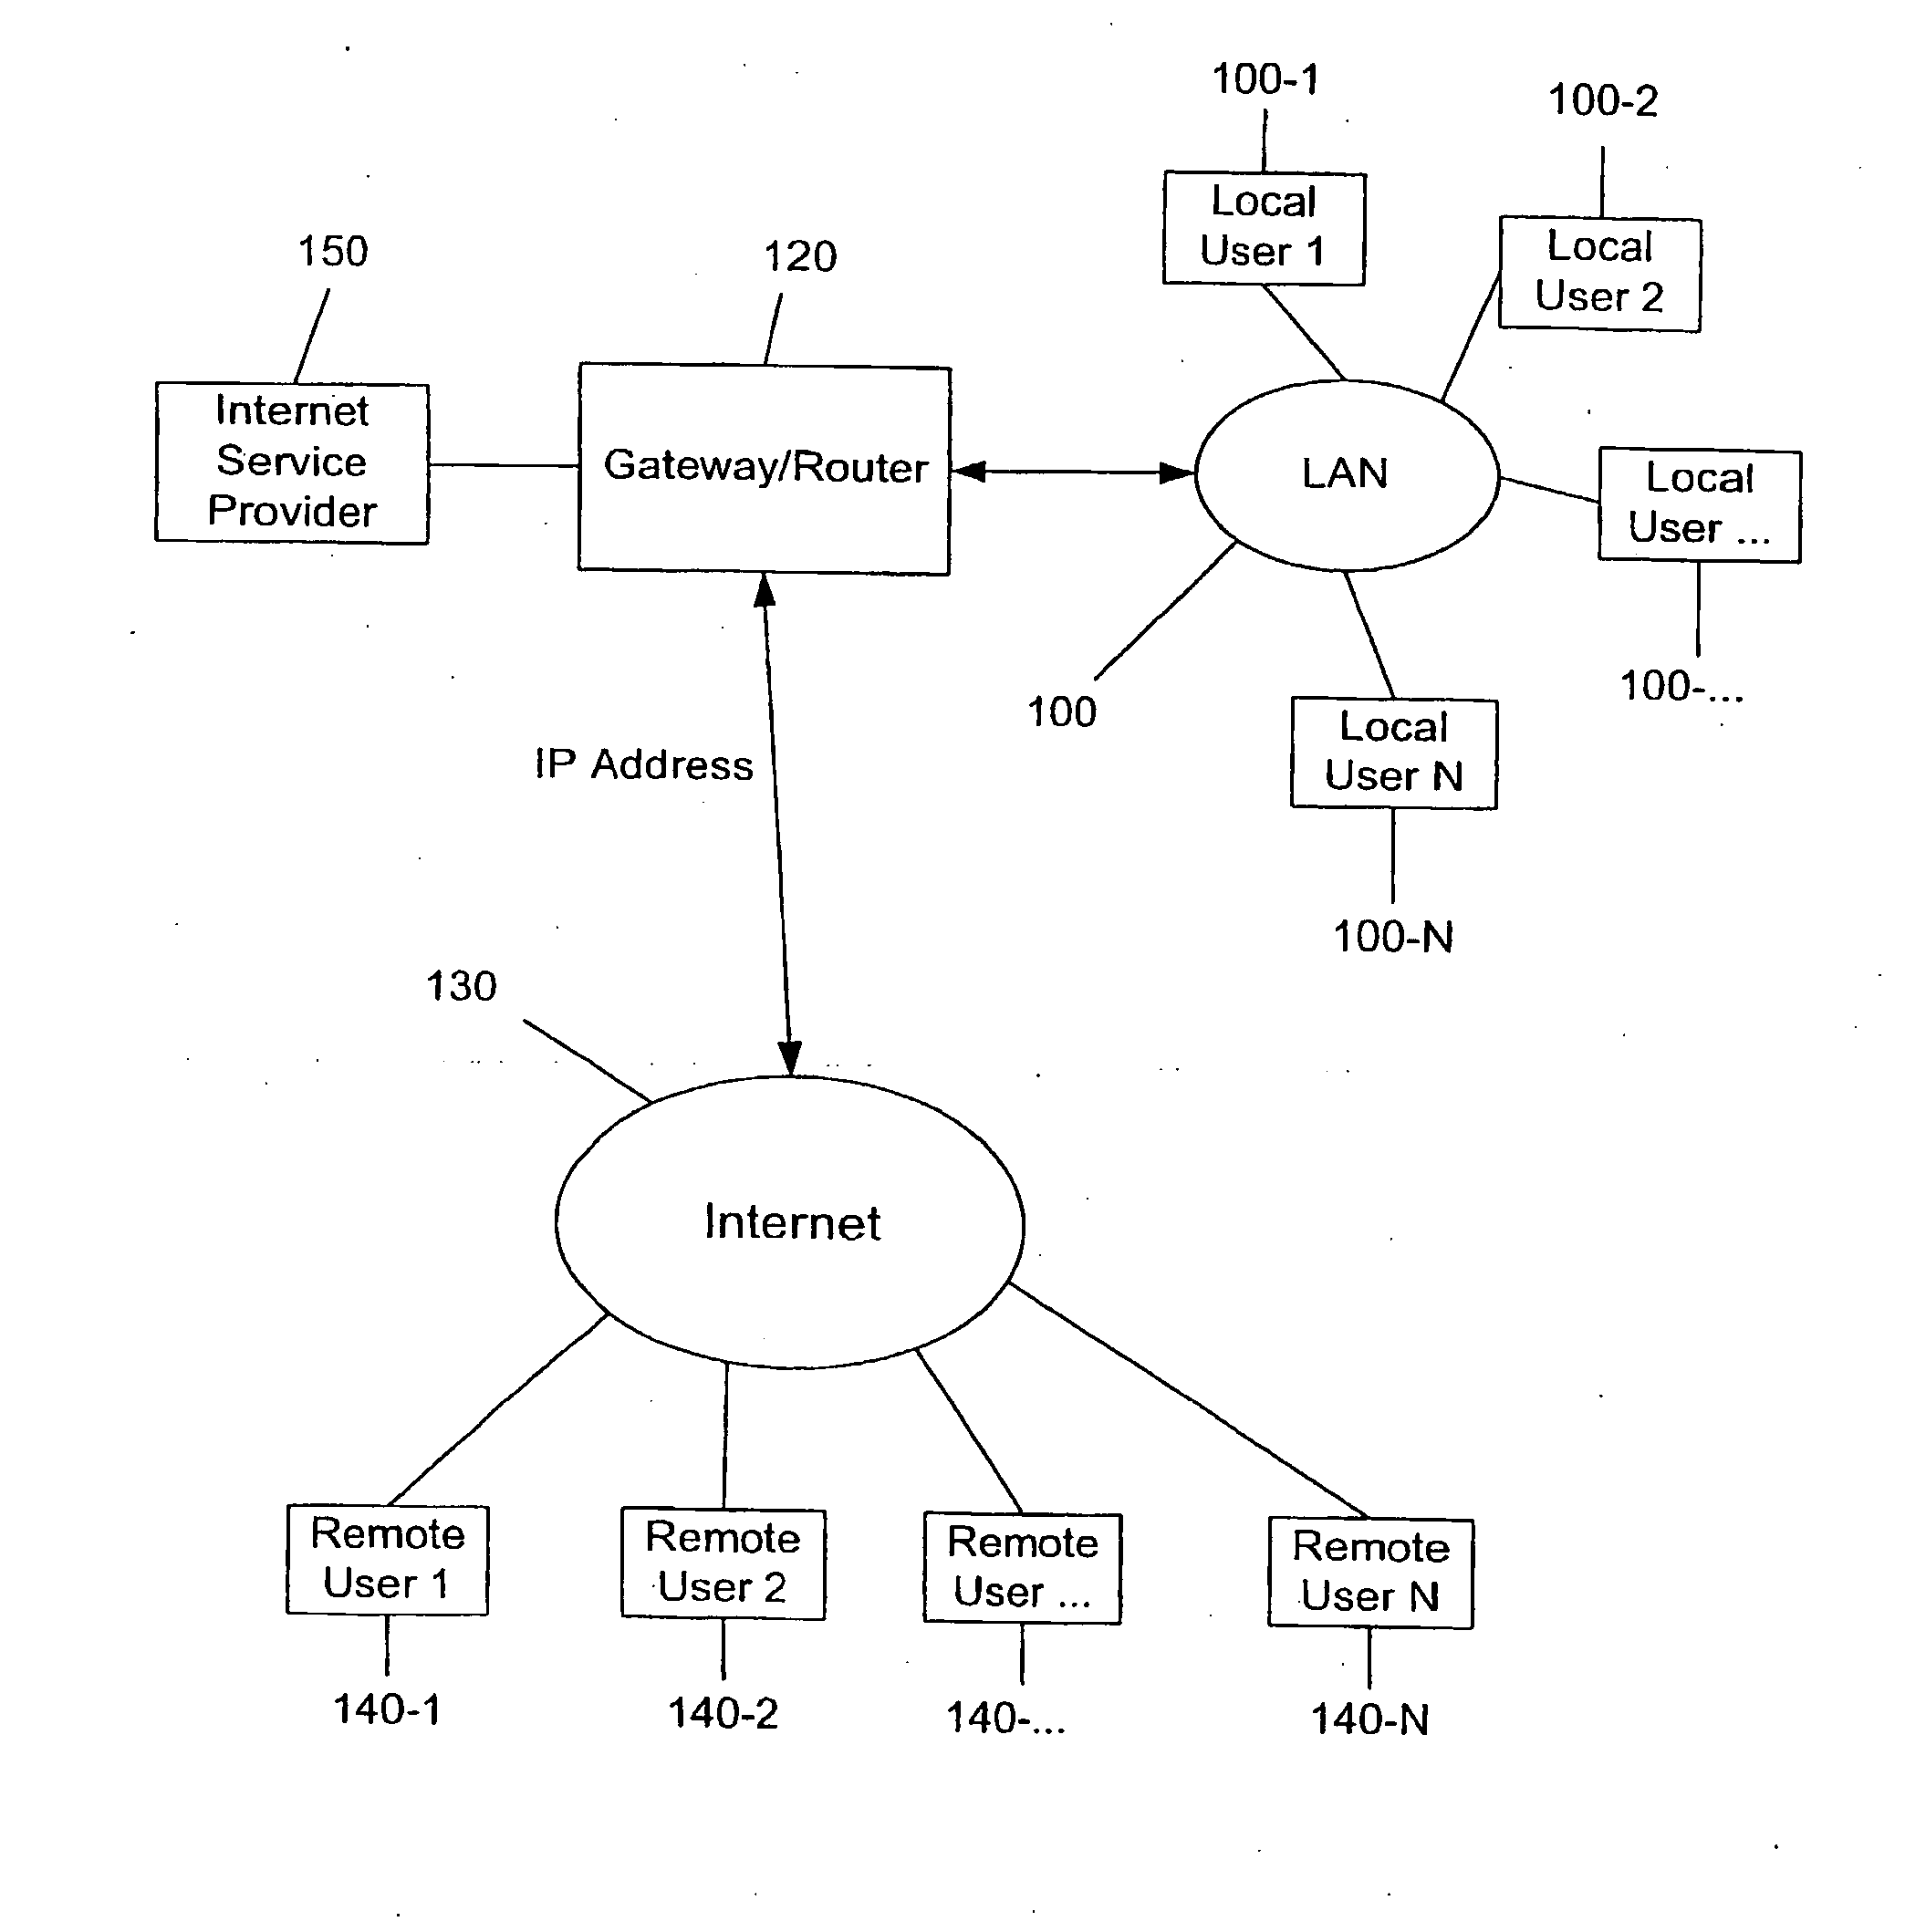 System and method for automatically configuring remote computer